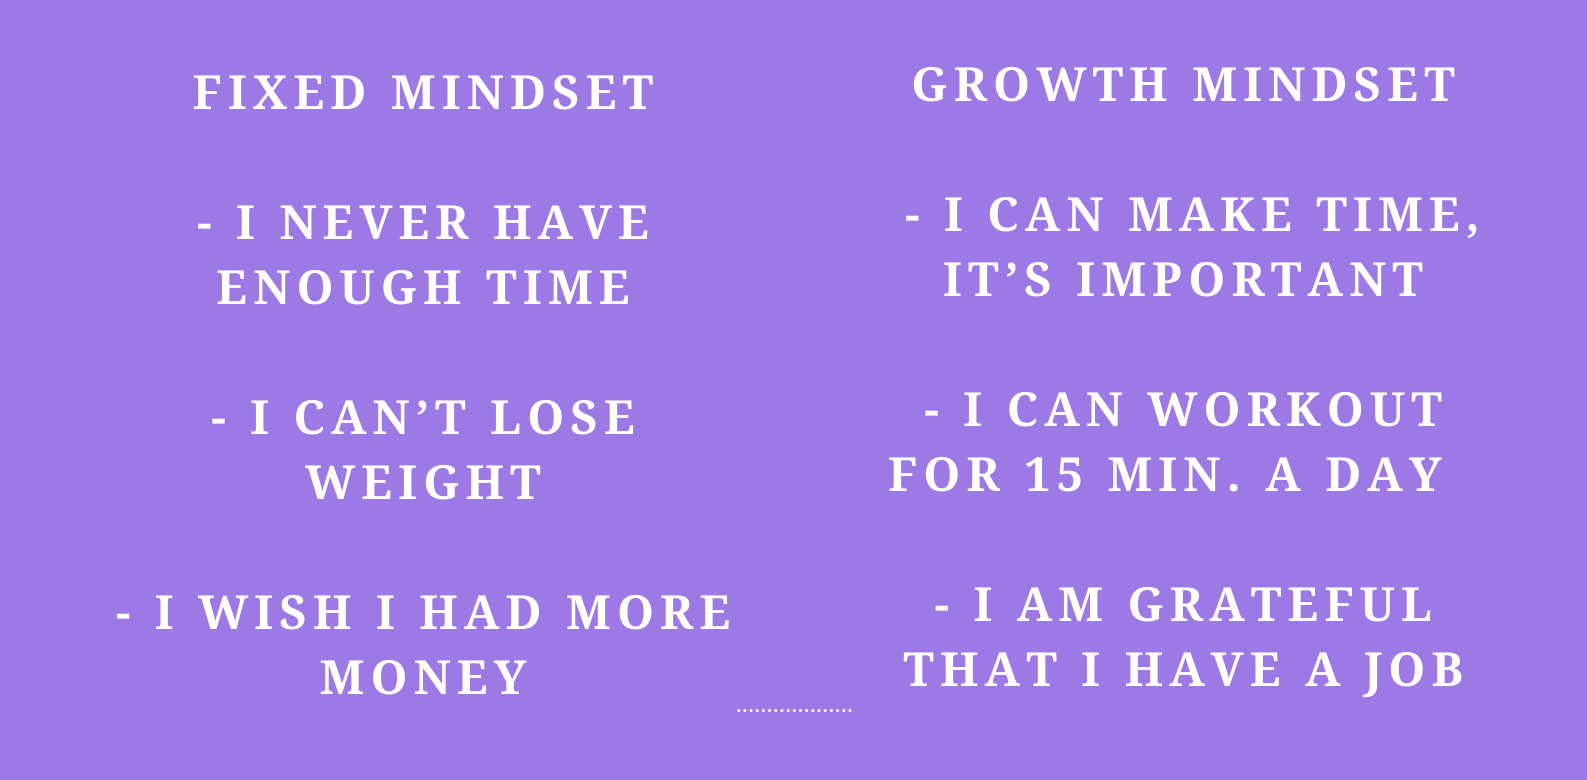 Why a Growth Mindset Matters